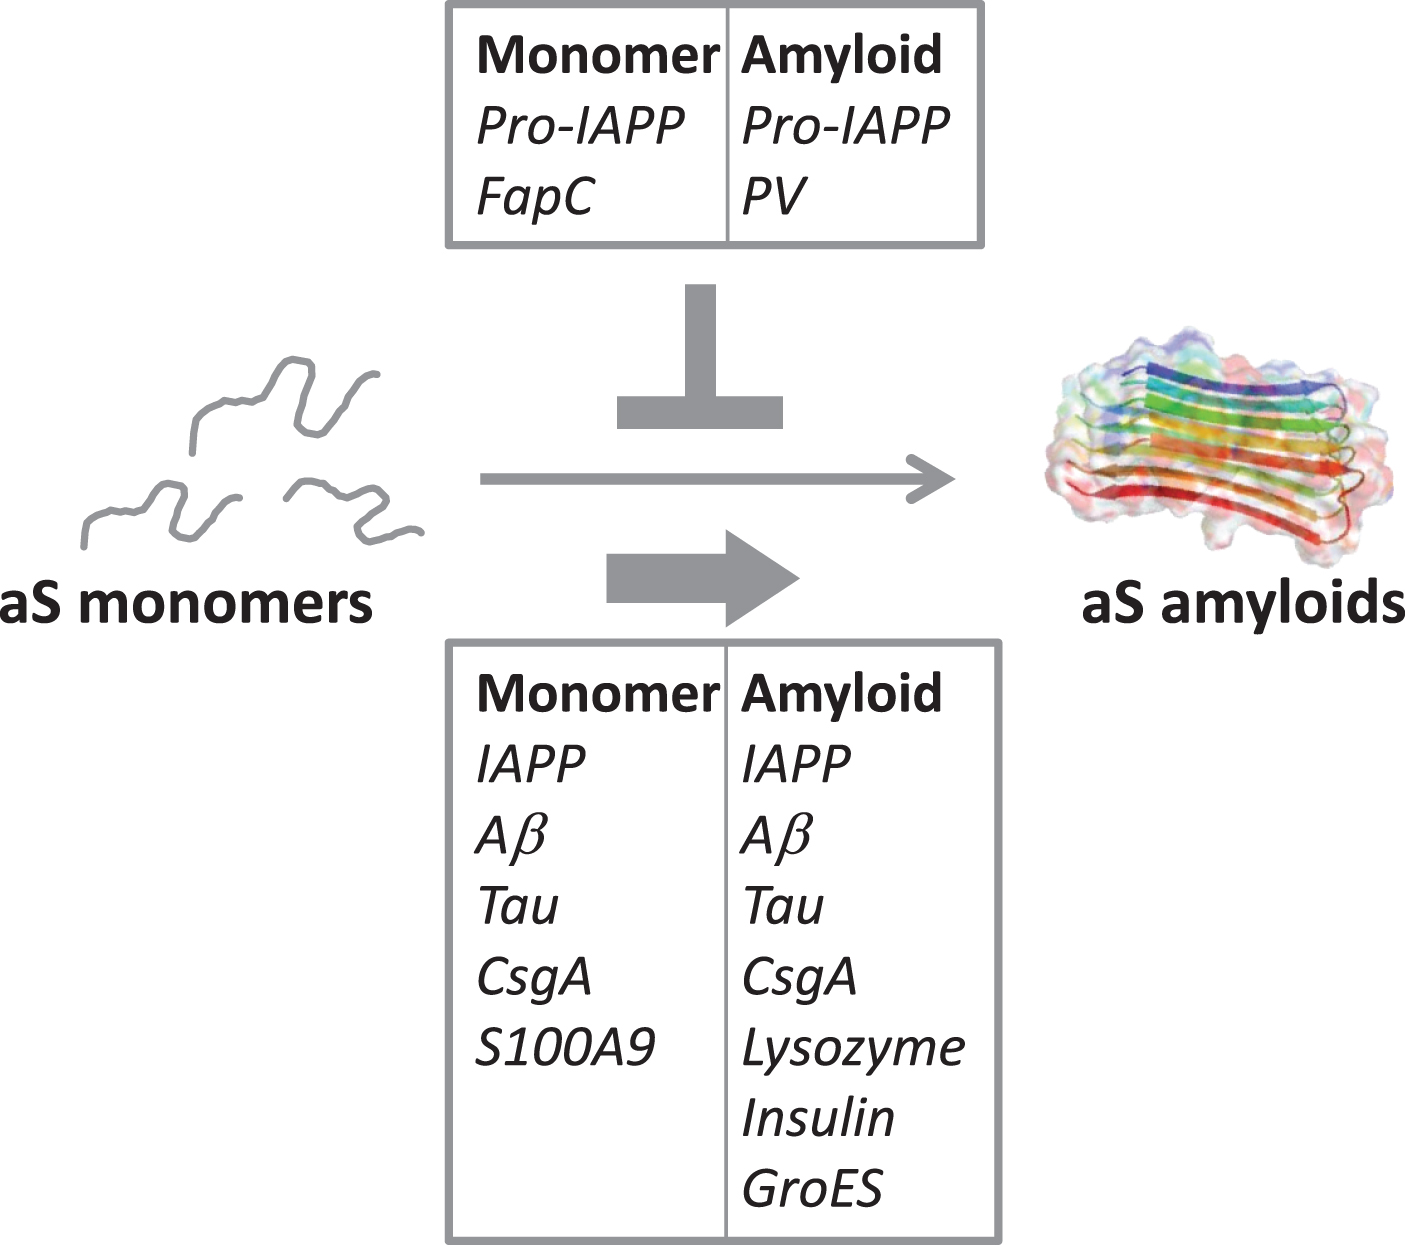 Illustration of the cross-reactivity results reported in Table 2, indicating the amyloidogenic proteins (as monomers or amyloids) that accelerate aS amyloid formation (bottom box) and the ones that reduce/block aS aggregation (top box).